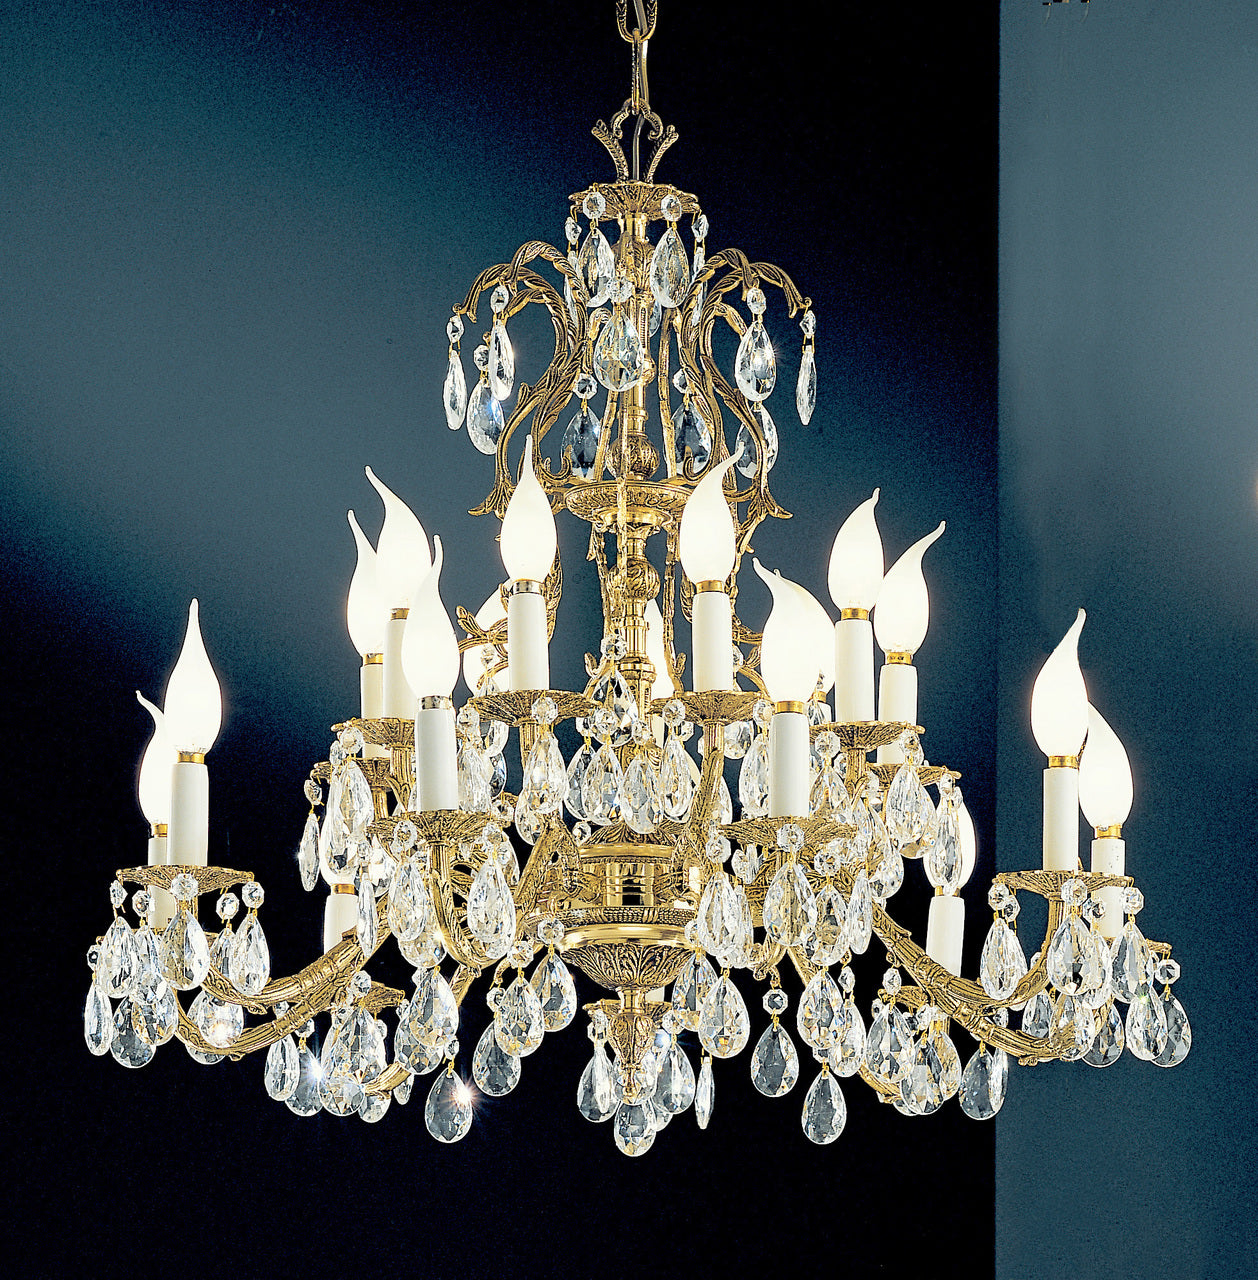 Classic Lighting 5518 OWB S Barcelona Crystal/Cast Brass Chandelier in Olde World Bronze (Imported from Spain)